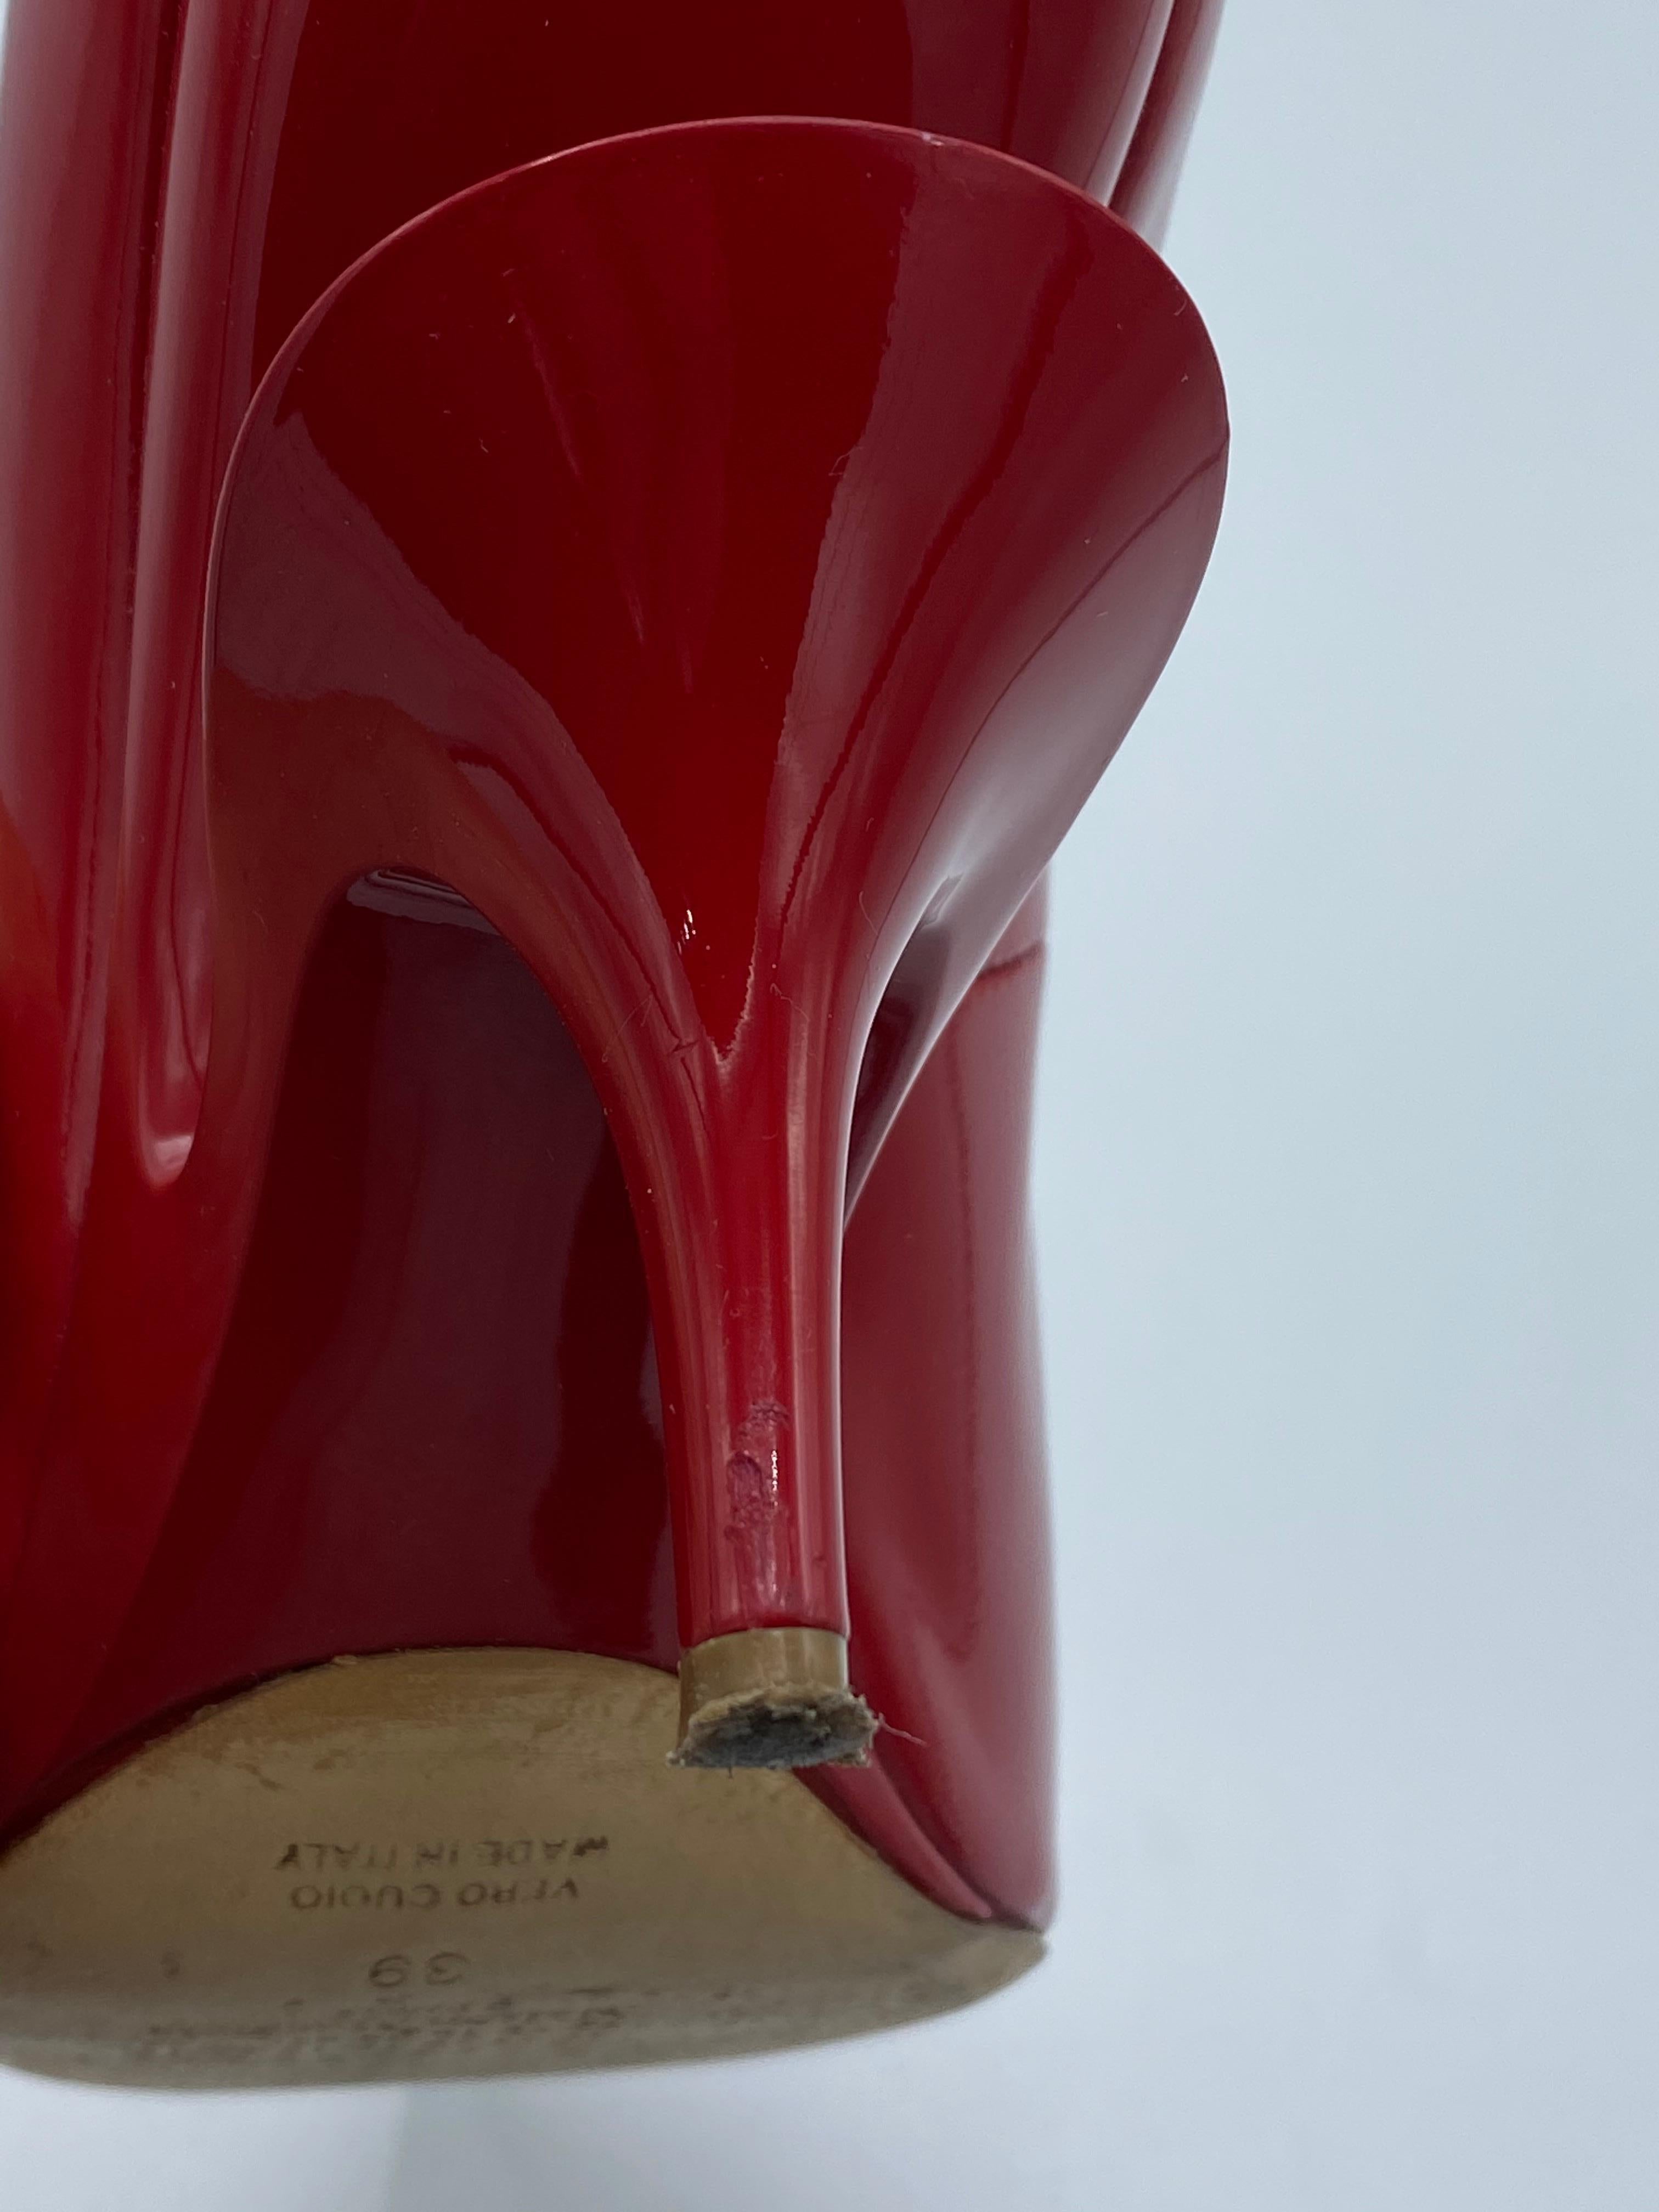 Maison Margiela Red Patent Leather Pump Heels Size 38 For Sale 11